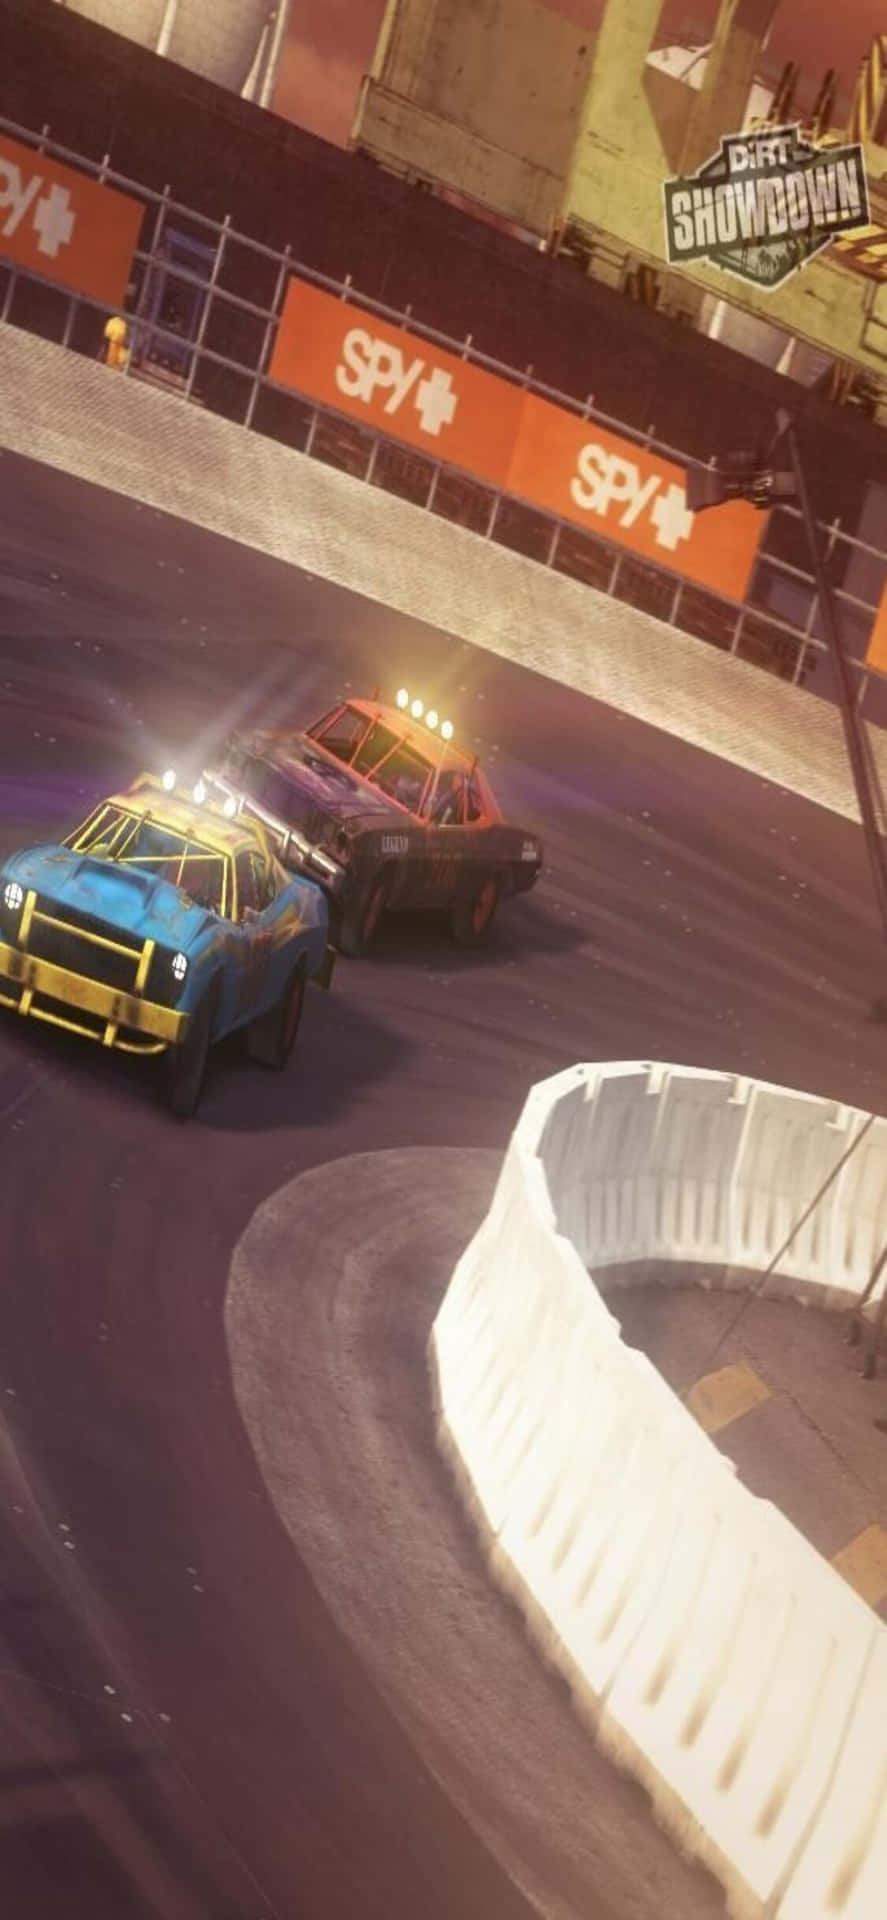 Watch the action unfold as racers race the dirt at an iphone Xs Dirt Showdown